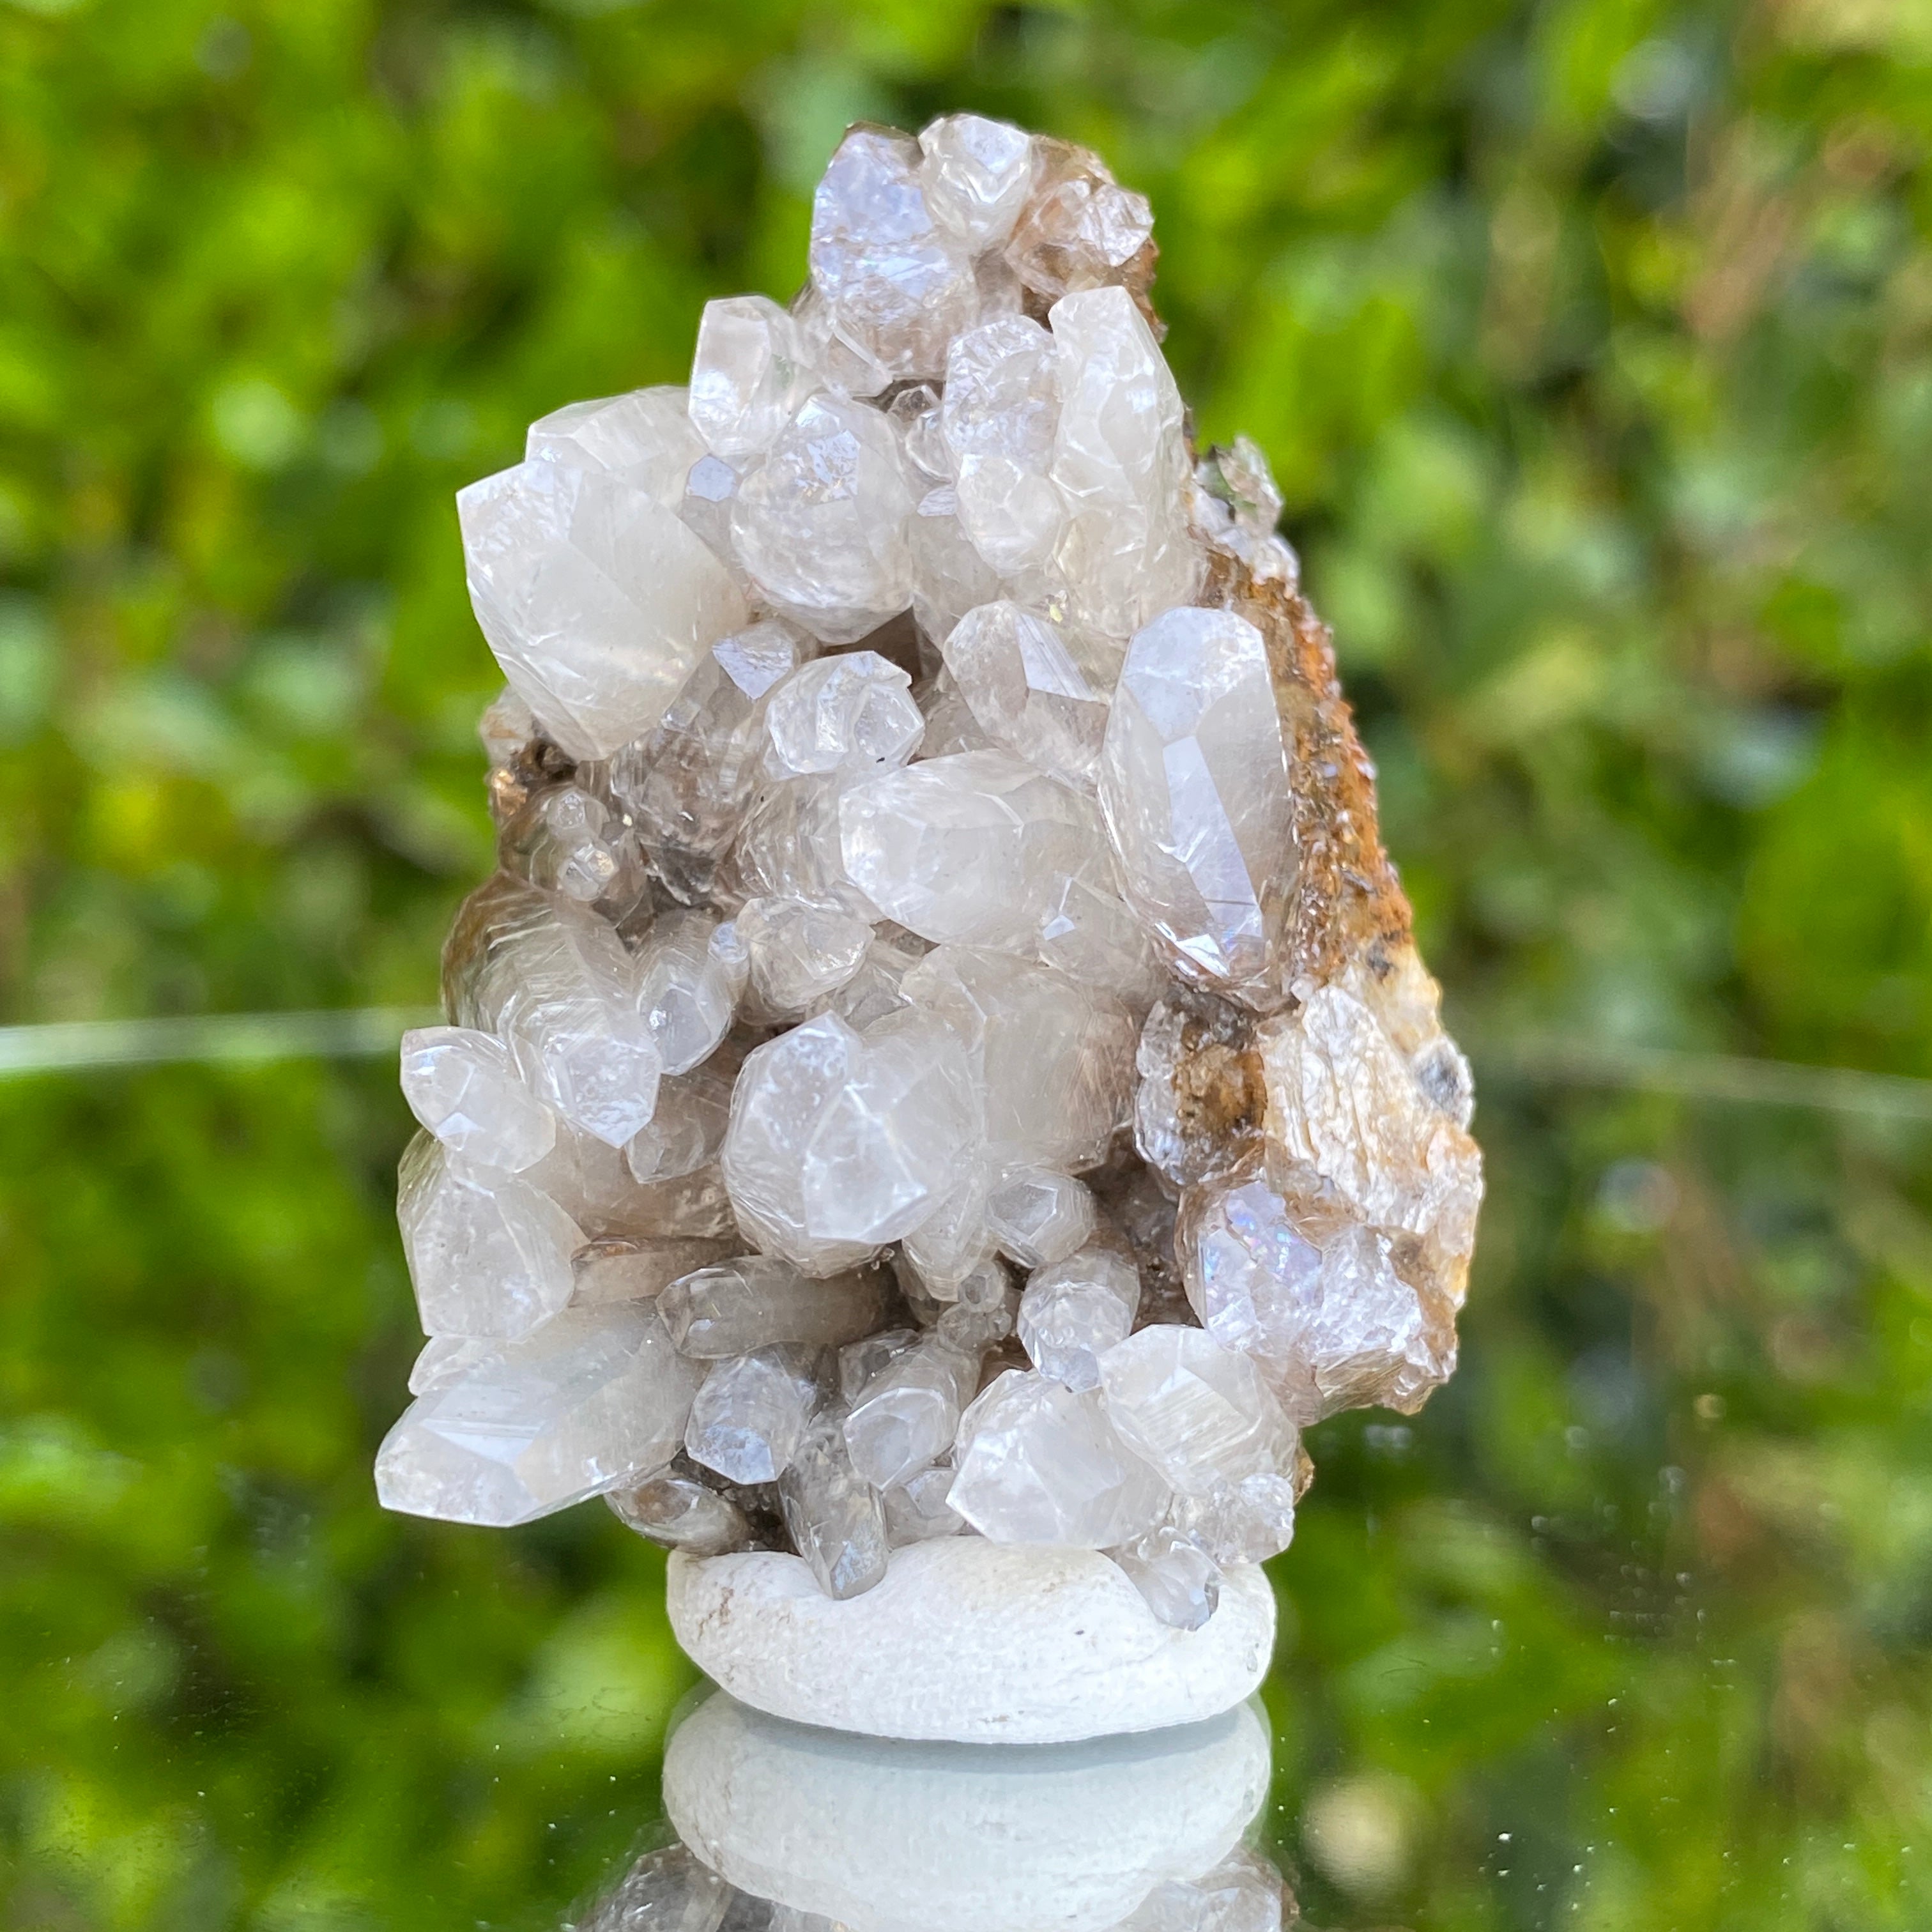 32g 5x3.5x2cm Clear Calcite from Fujian,China